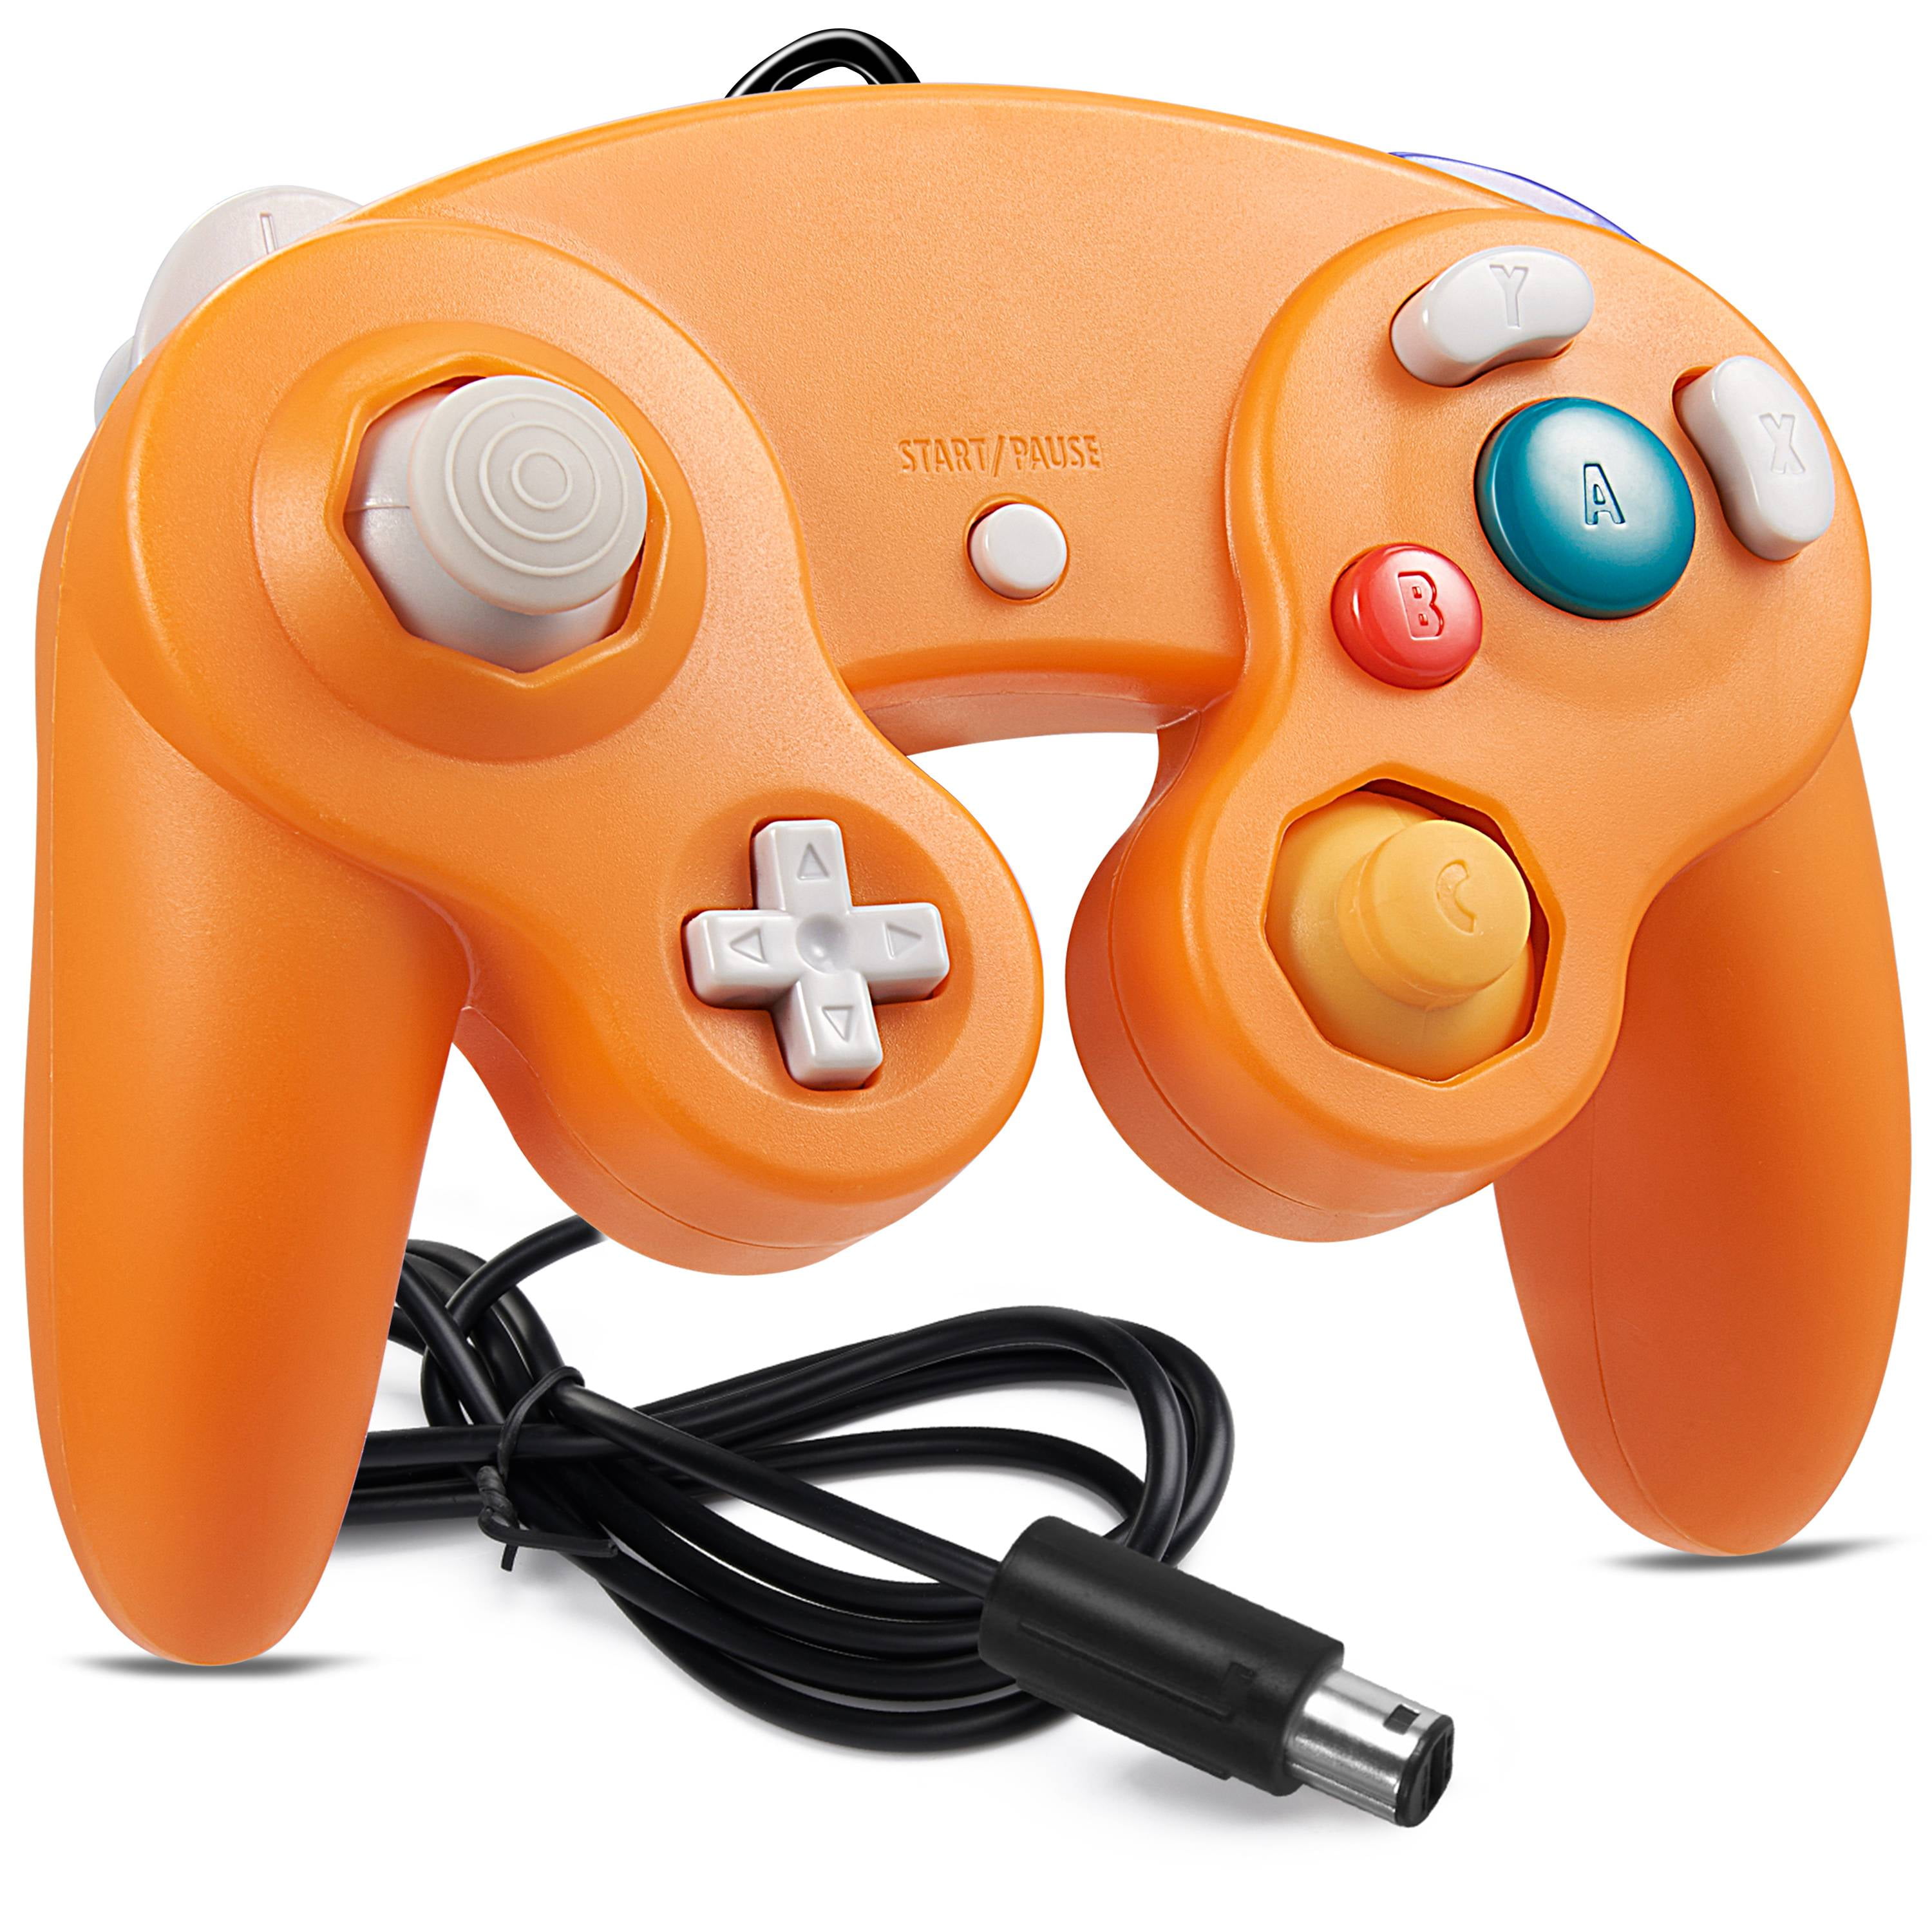 LUXMO Gamecube Controller, Wired Controllers Classic Gamepad for Game Cube & Wii Wii U Game Console - Walmart.com